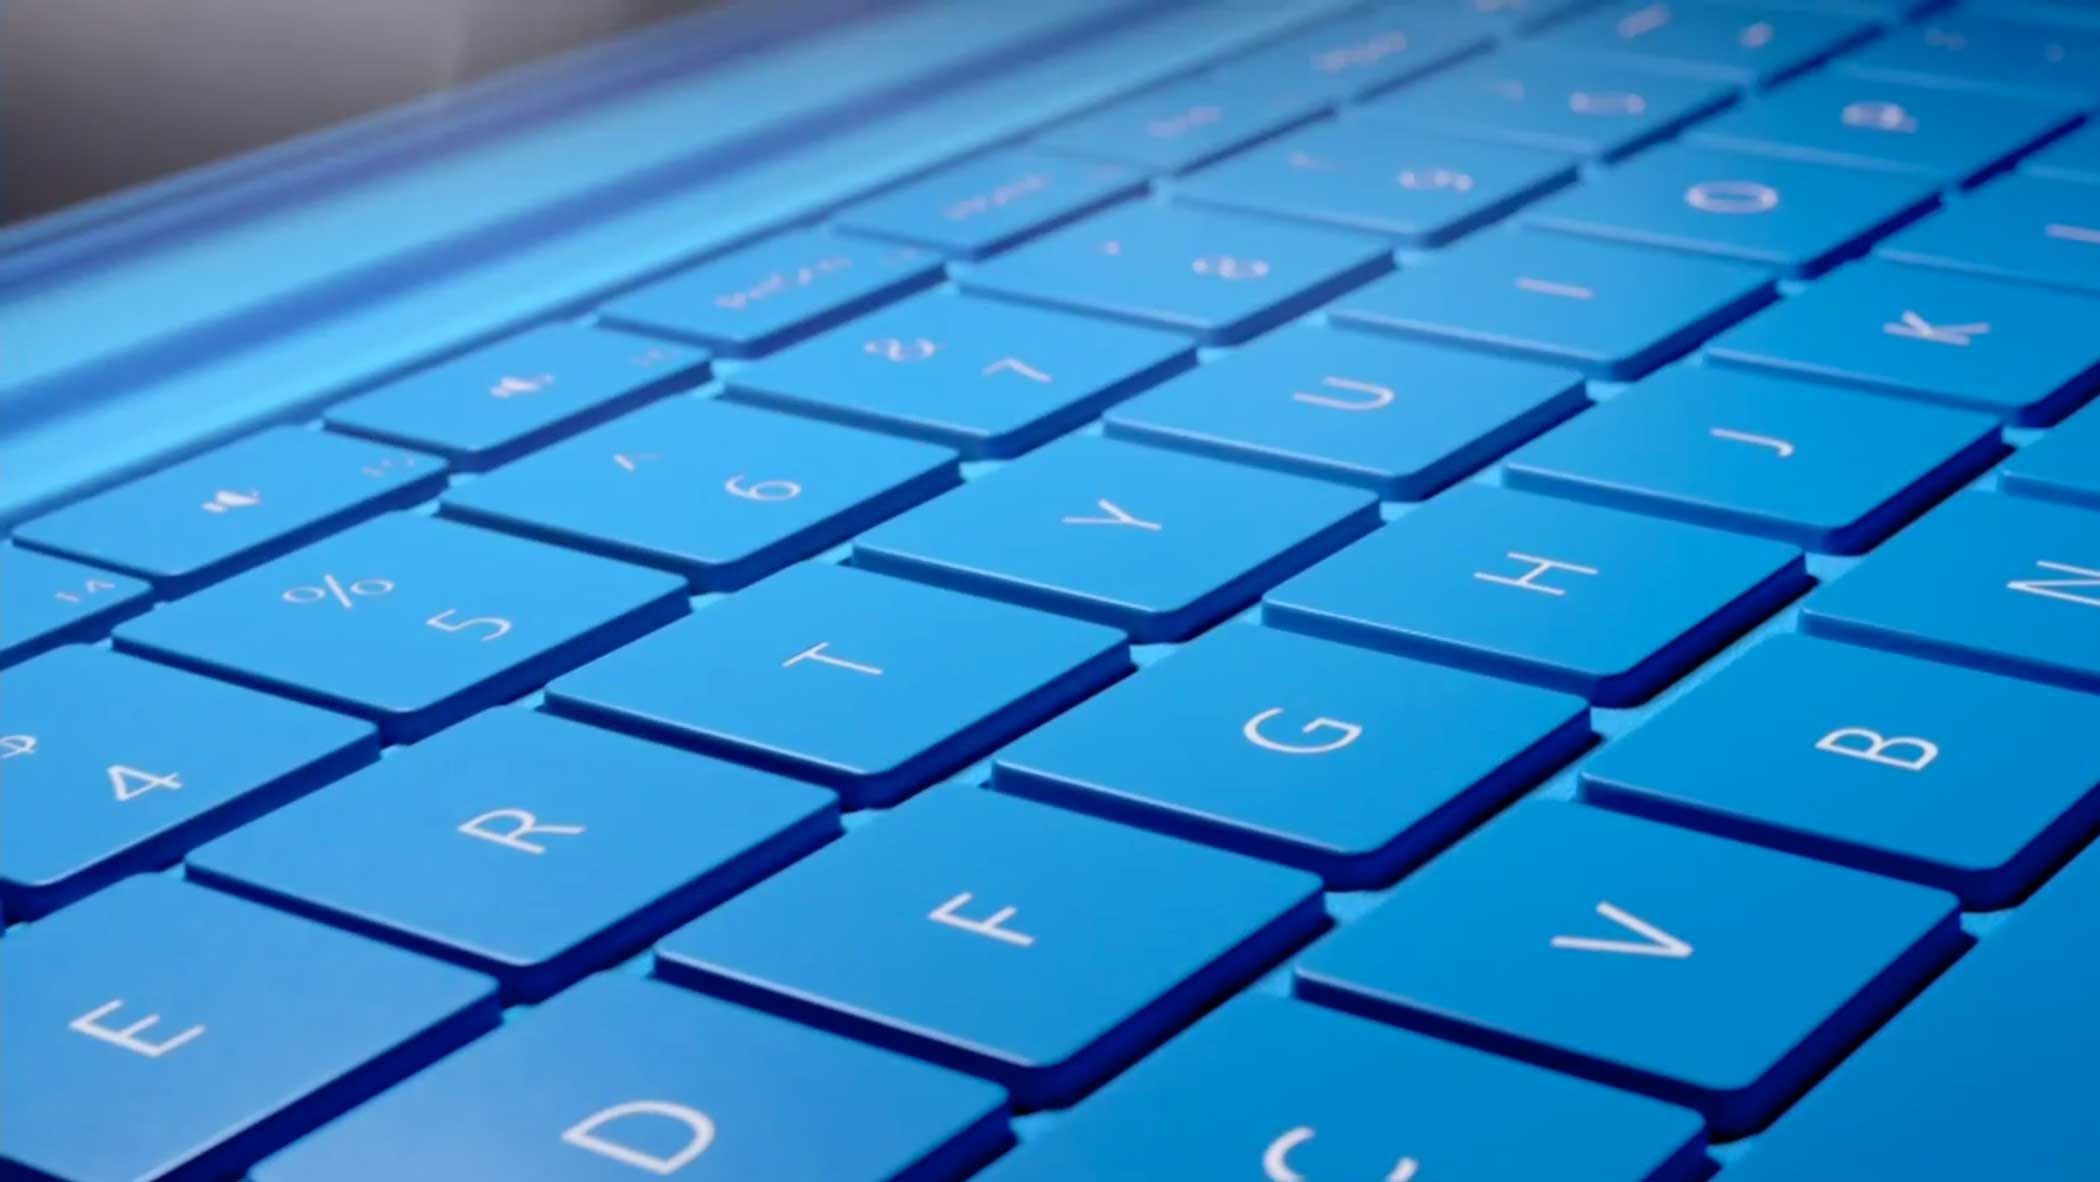 2100x1182 This Is Microsoft's New, Upgraded Surface Pro 4 | Time